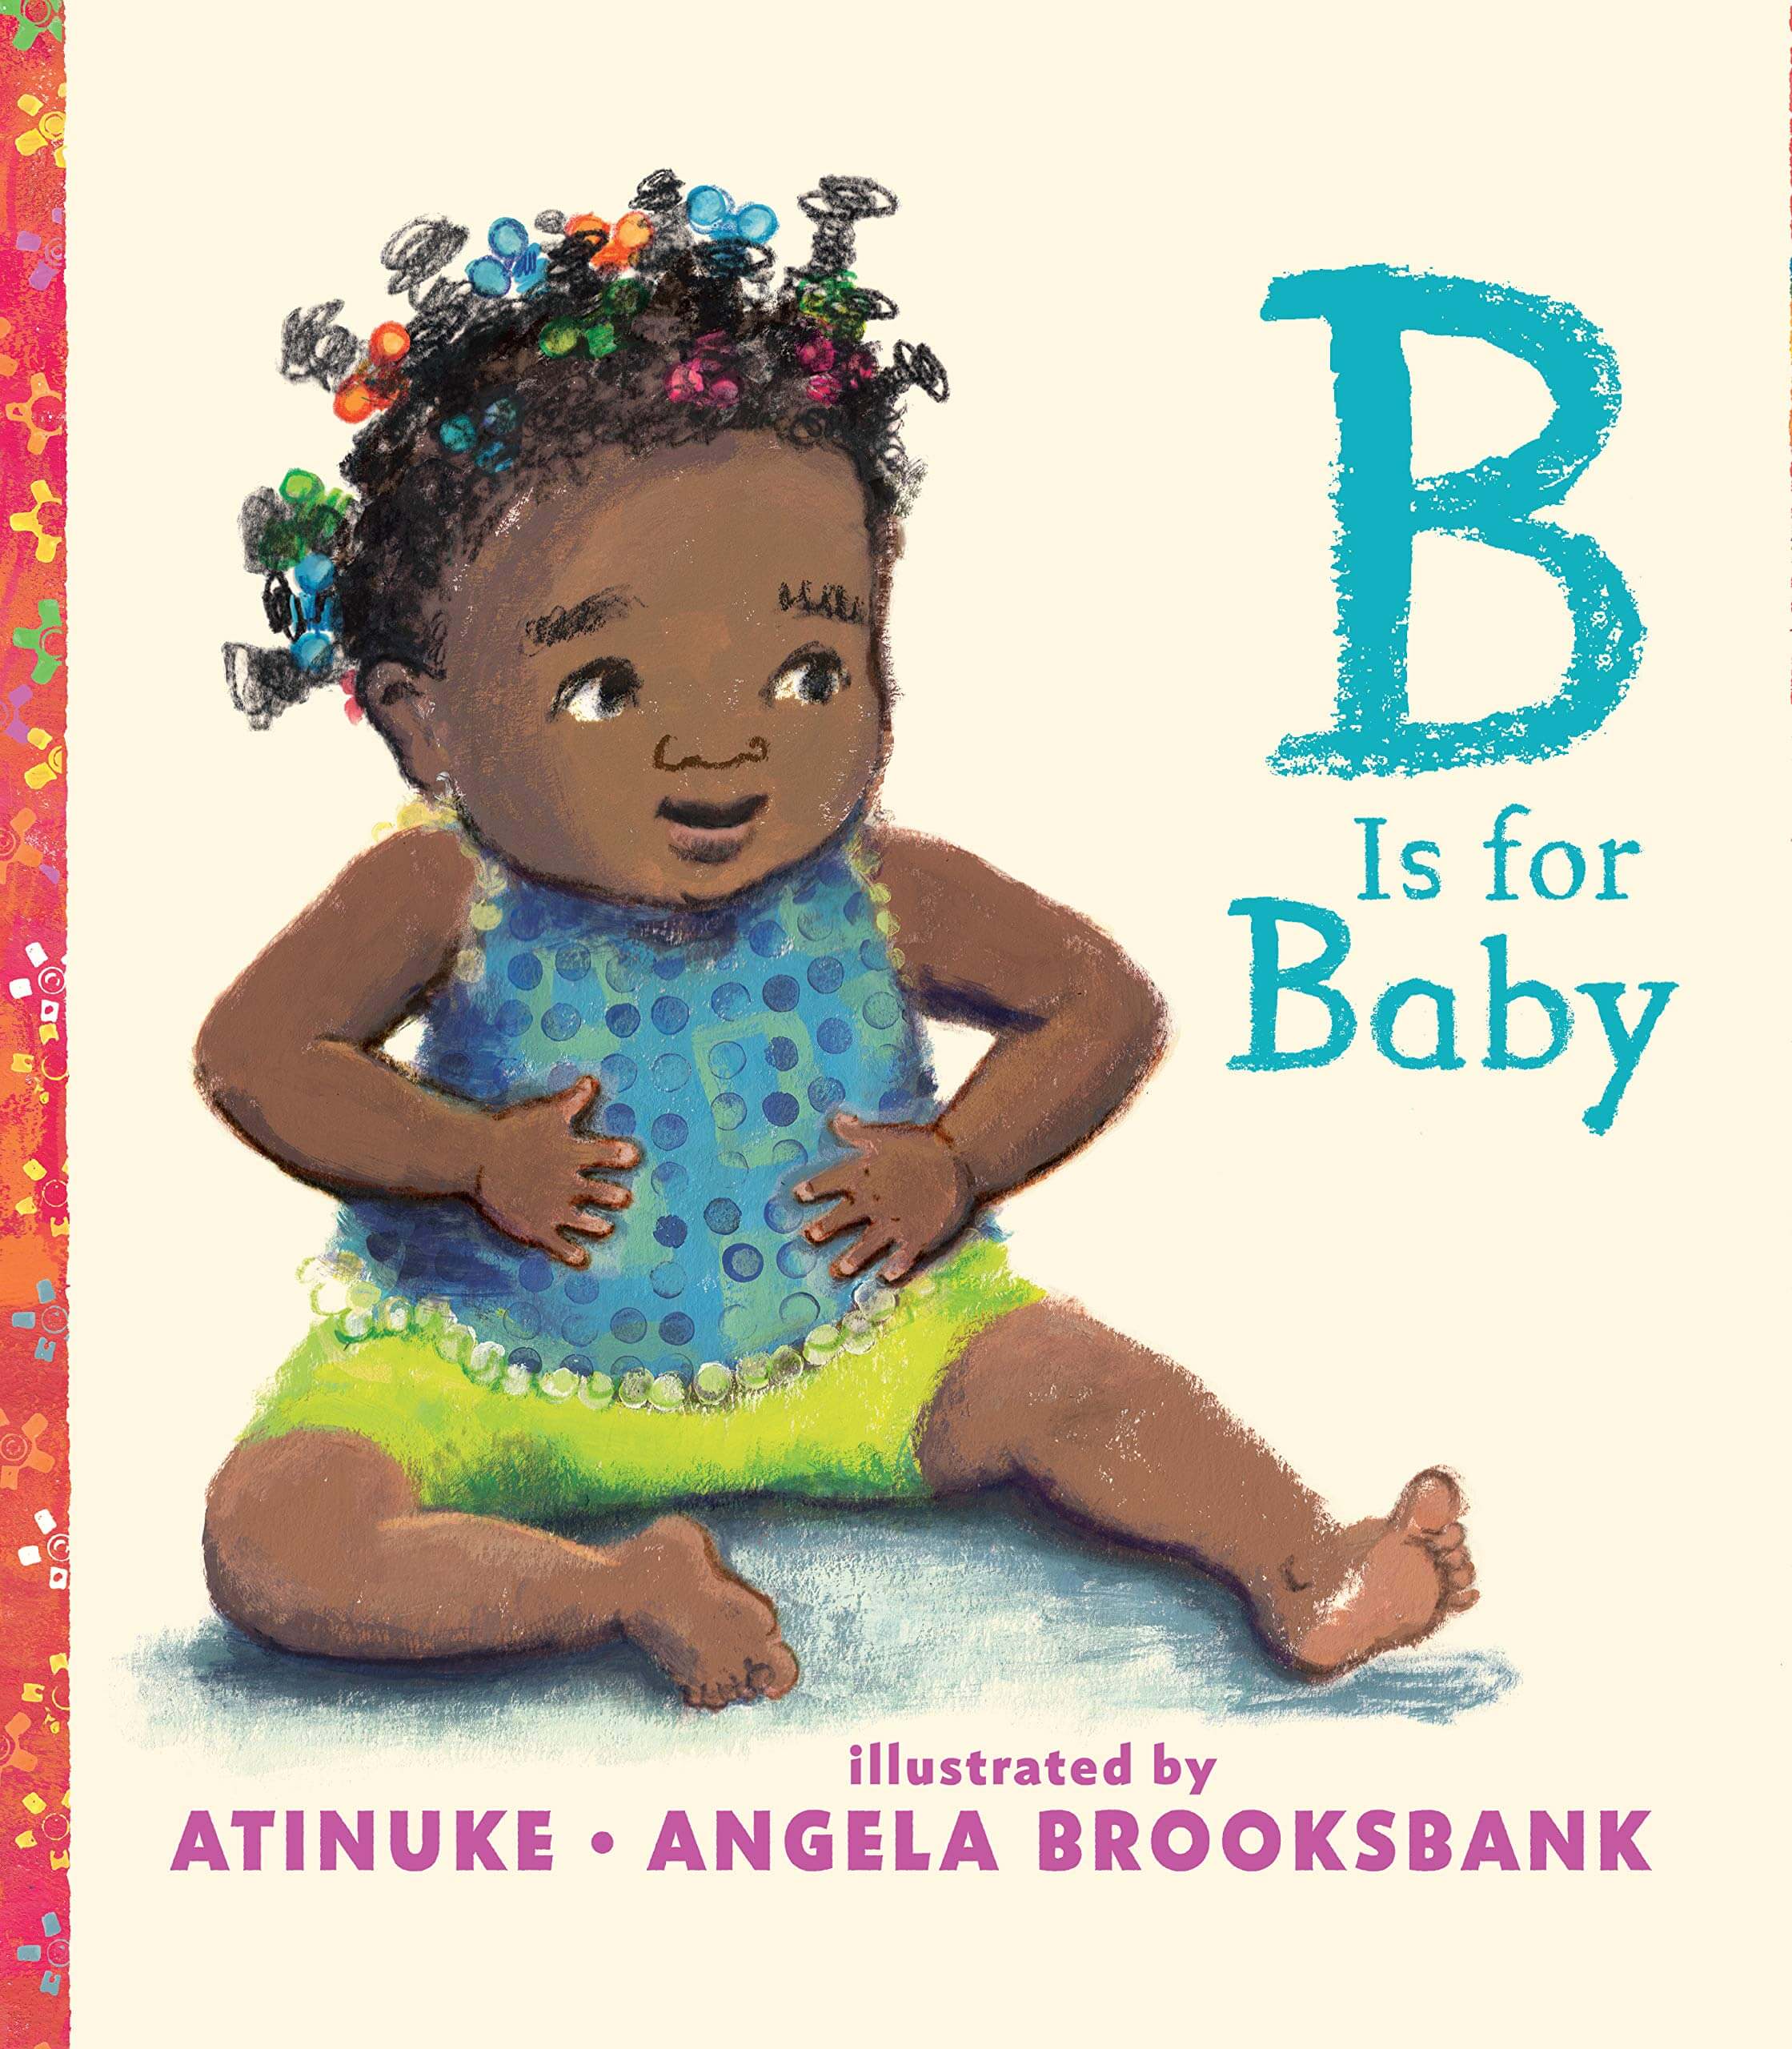  B Is for Baby, by Atinuke and Angela Brooksbank, Illustrated by Angela Brooksbank